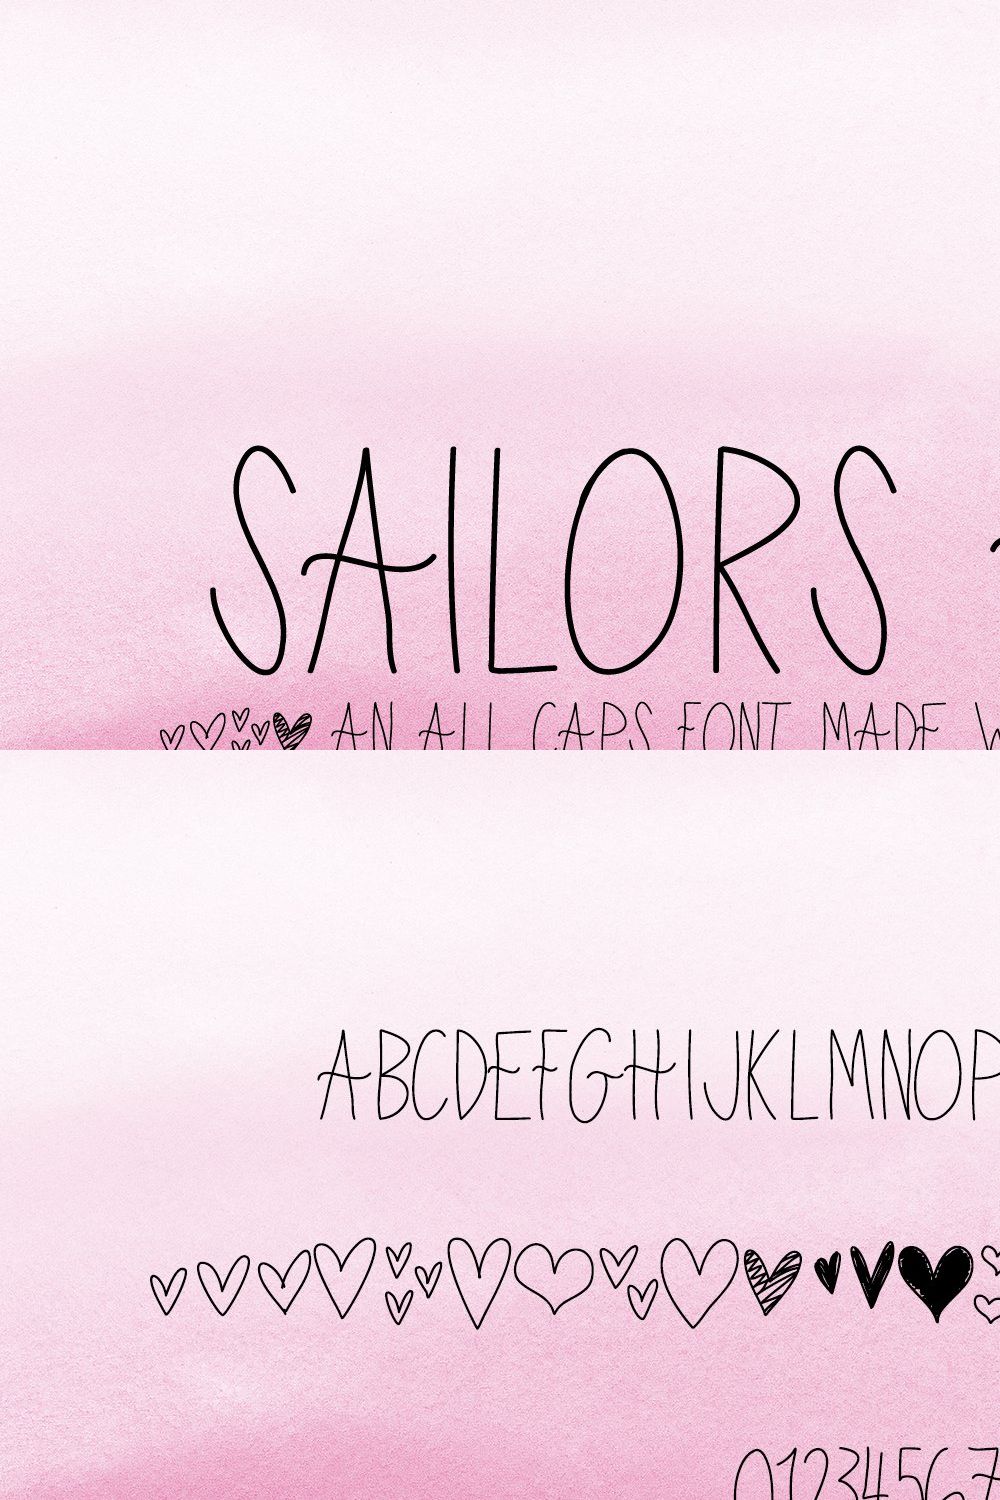 Sailor's Heart Font - Made with Love pinterest preview image.